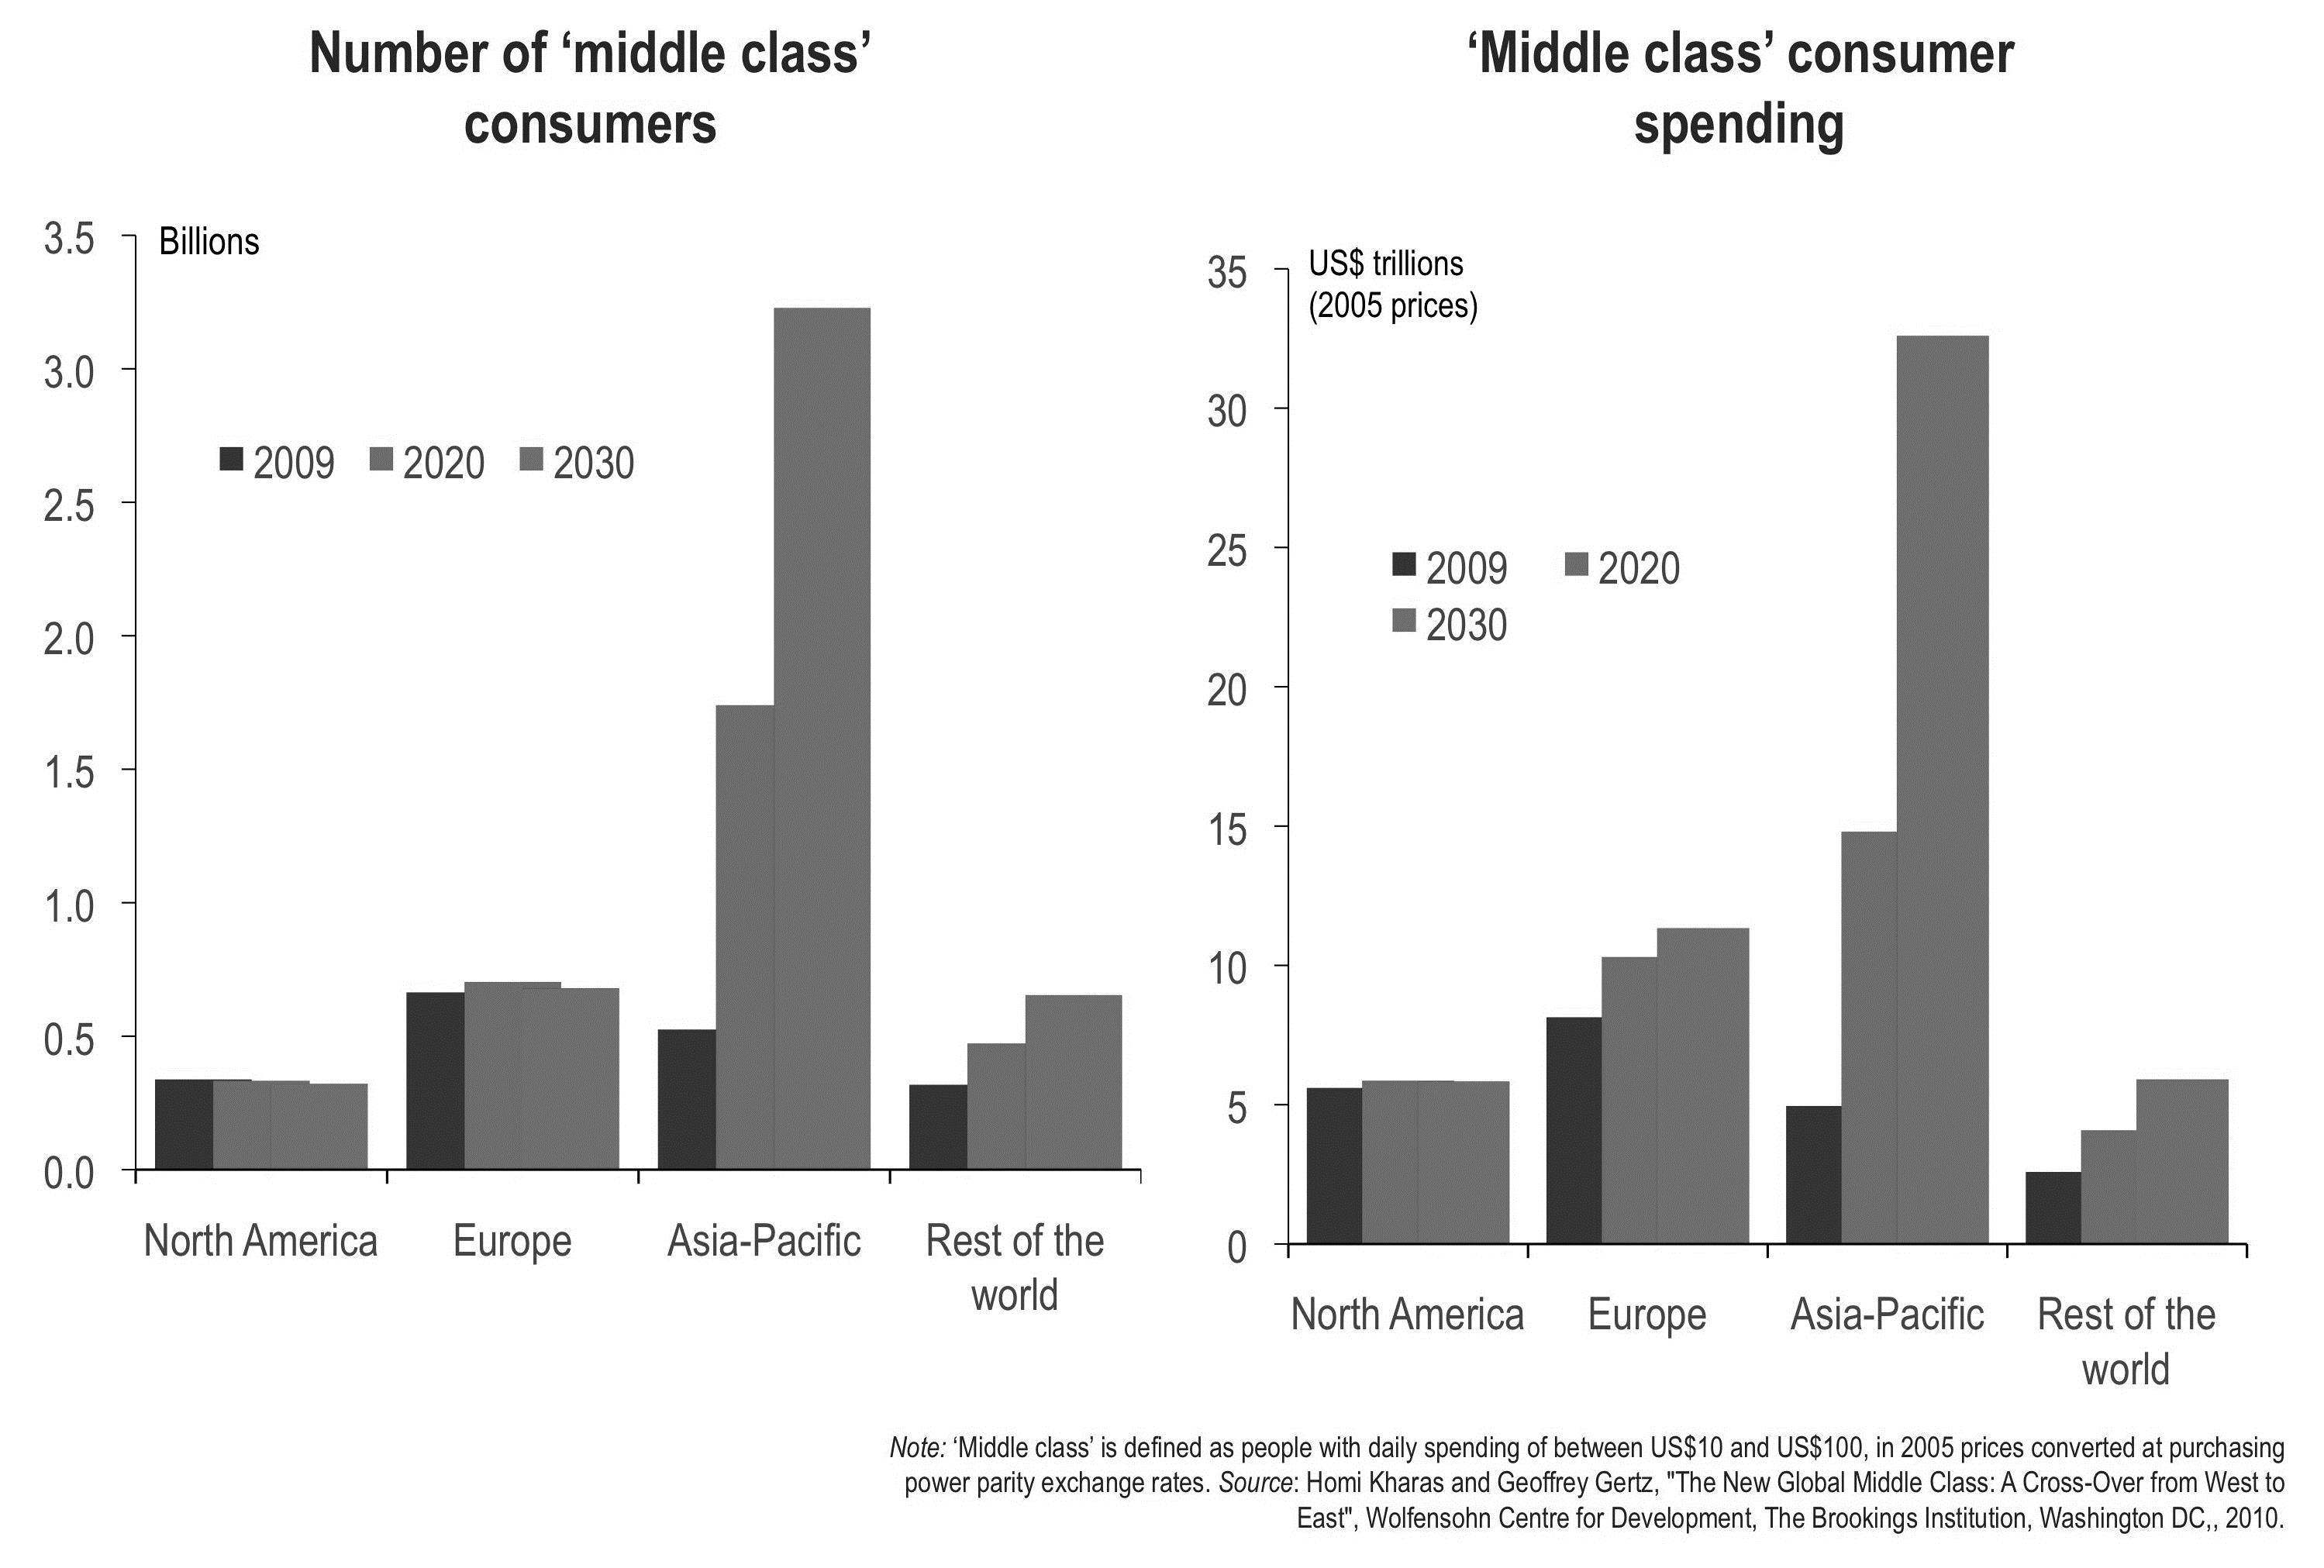 Figure 26 (a): Number of ‘middle class’ consumers and (b) ‘middle class’ consumer spending.